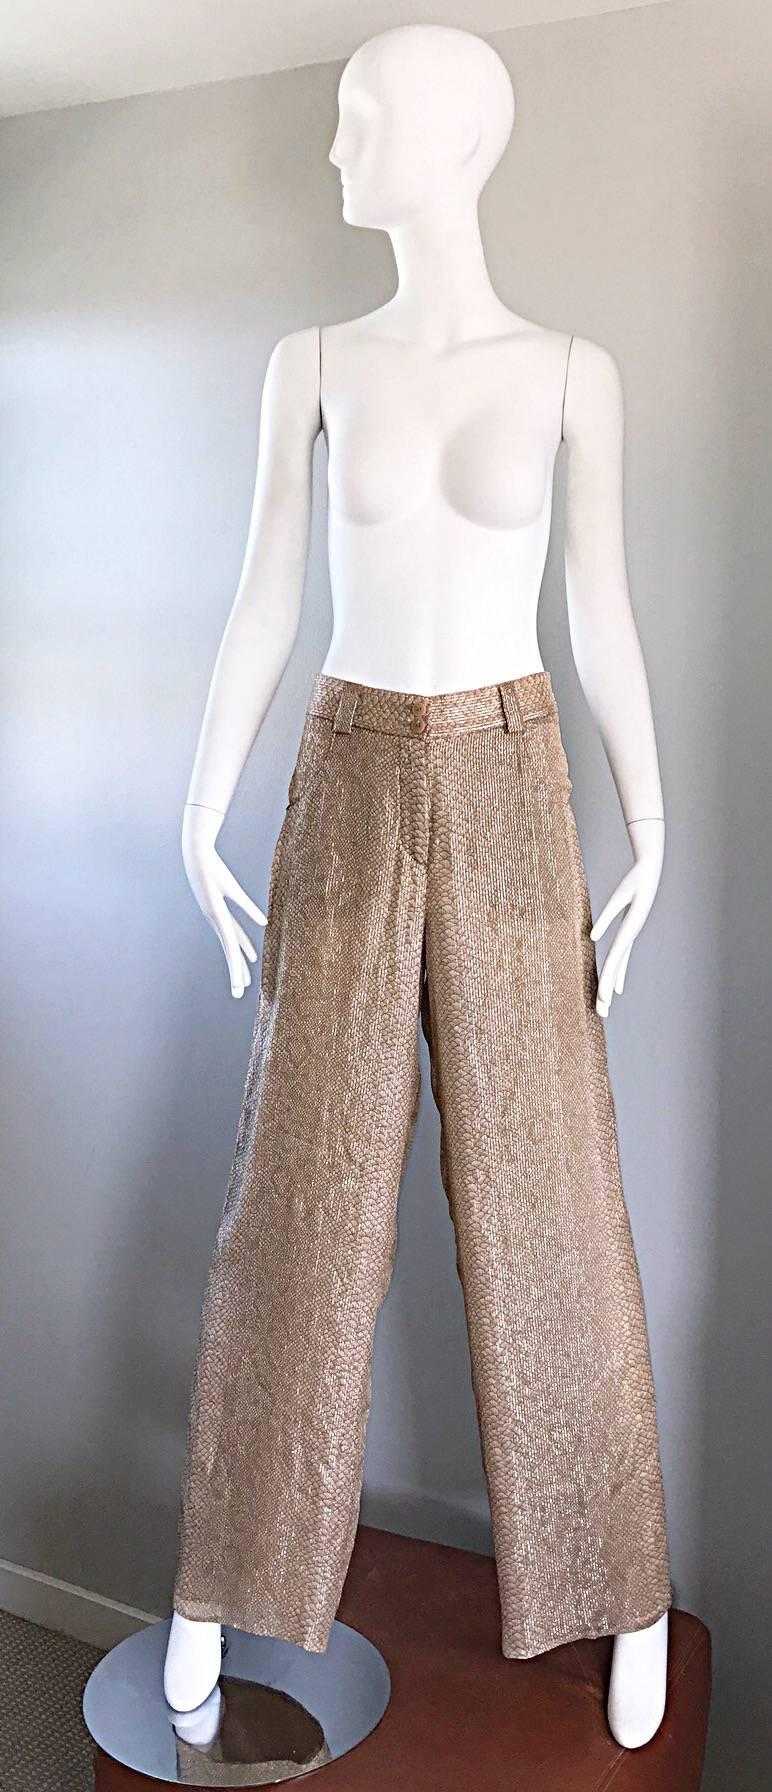 Amazing vintage 1990s / 90s GIORGIO ARMANI Women’s silk chiffon wide leg trousers! Tan and brown snake skin print, with gold metallic threaded vertical stripes throughout. Chic fit, with extra wide legs. Double layered silk chiffon feels incredible